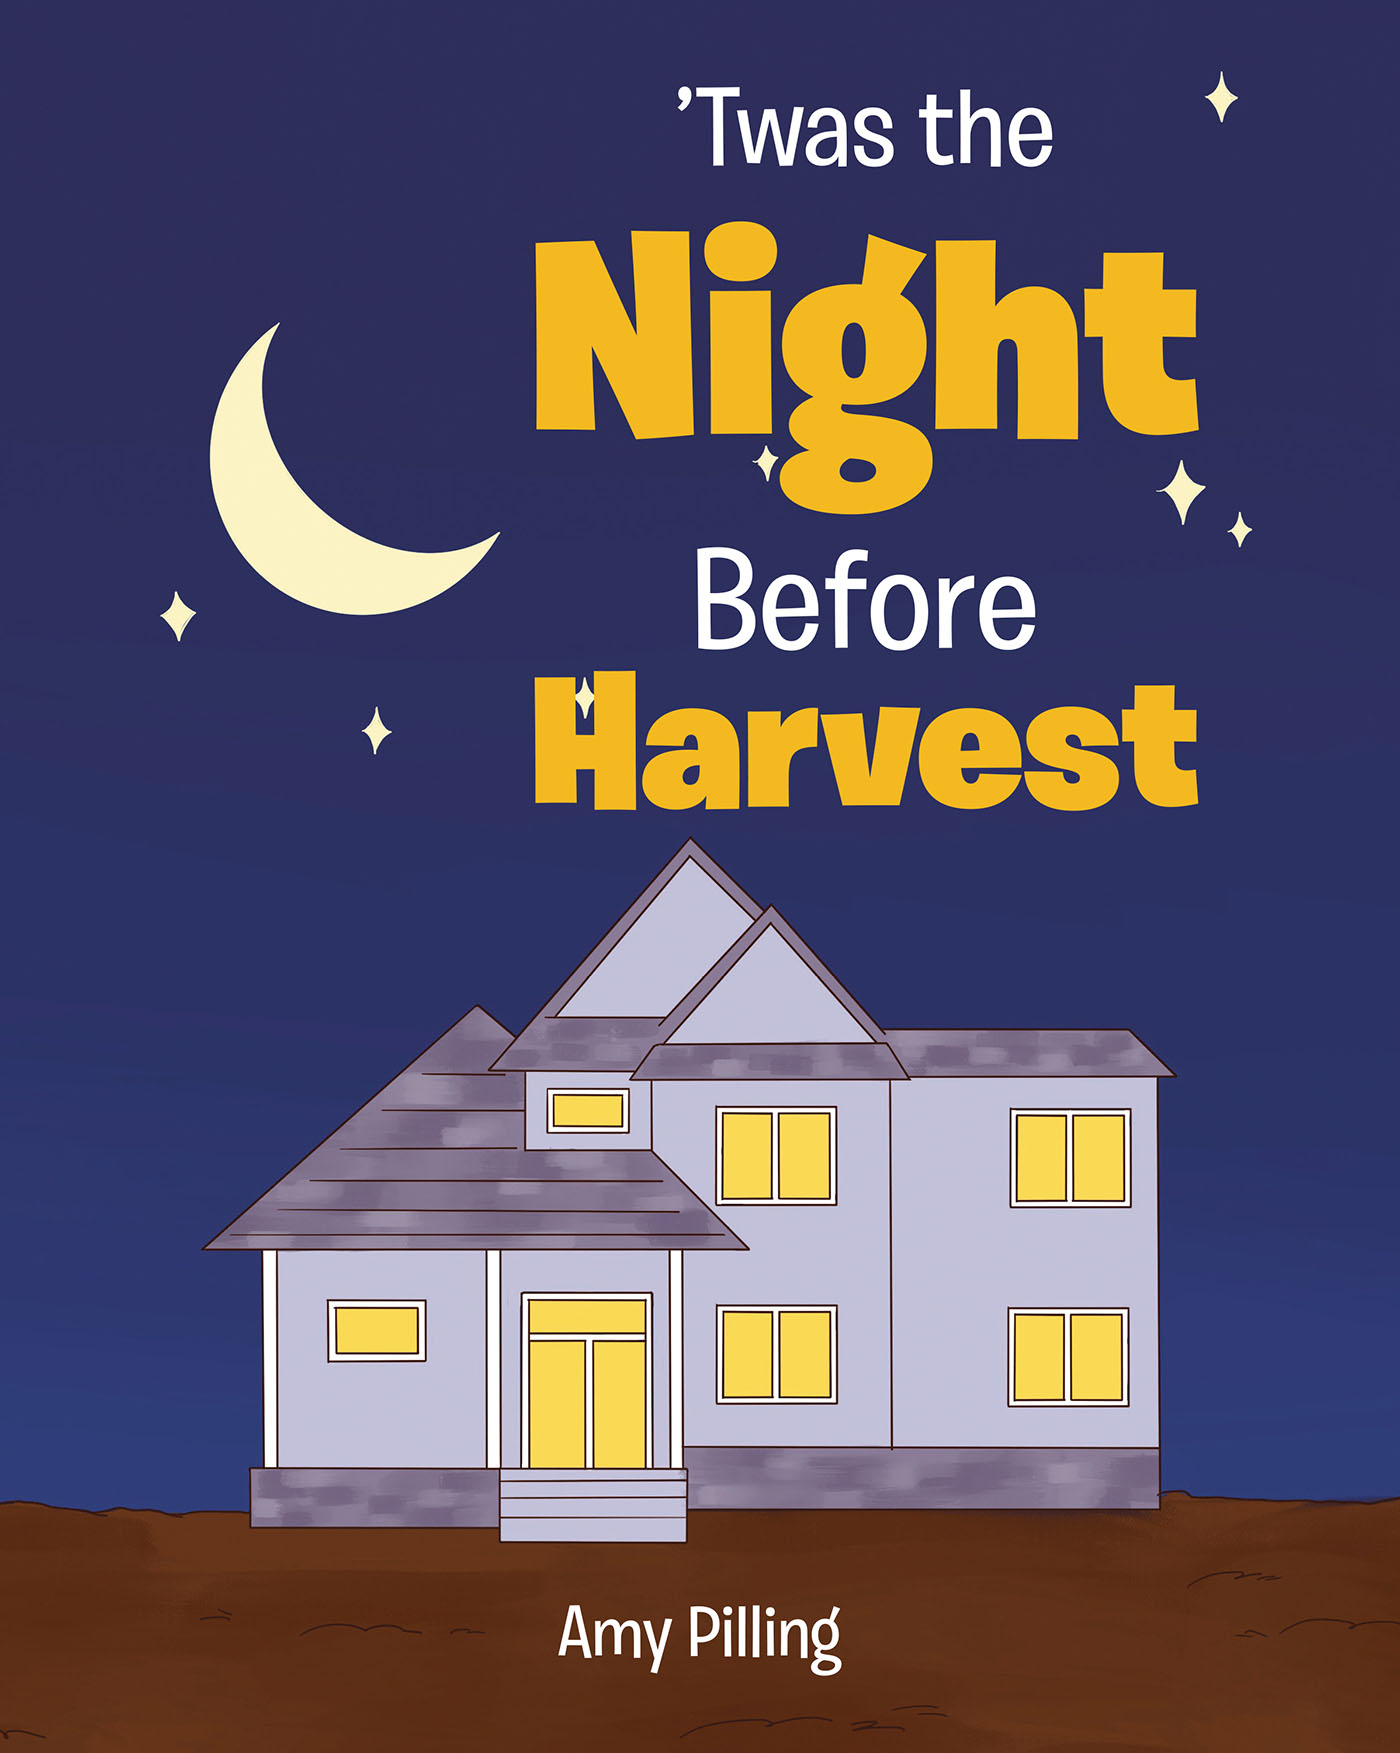 Amy Pilling’s Newly Released "‘Twas the Night Before Harvest" is a Charming Reimagining of a Familiar Poem That Explores the Joys of Life on the Farm